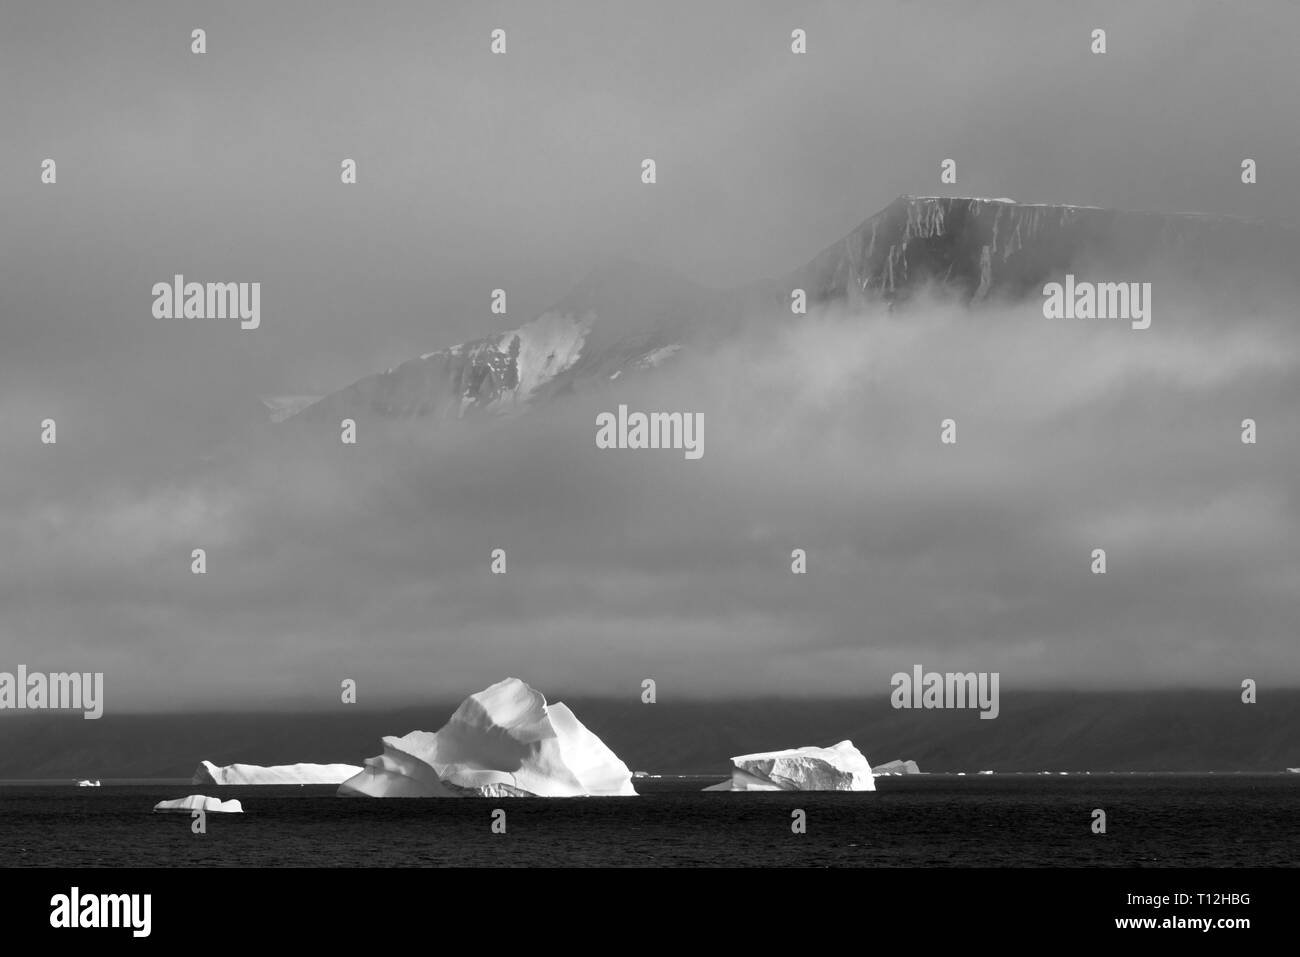 Floating iceberg in the ocean, Greenland Stock Photo